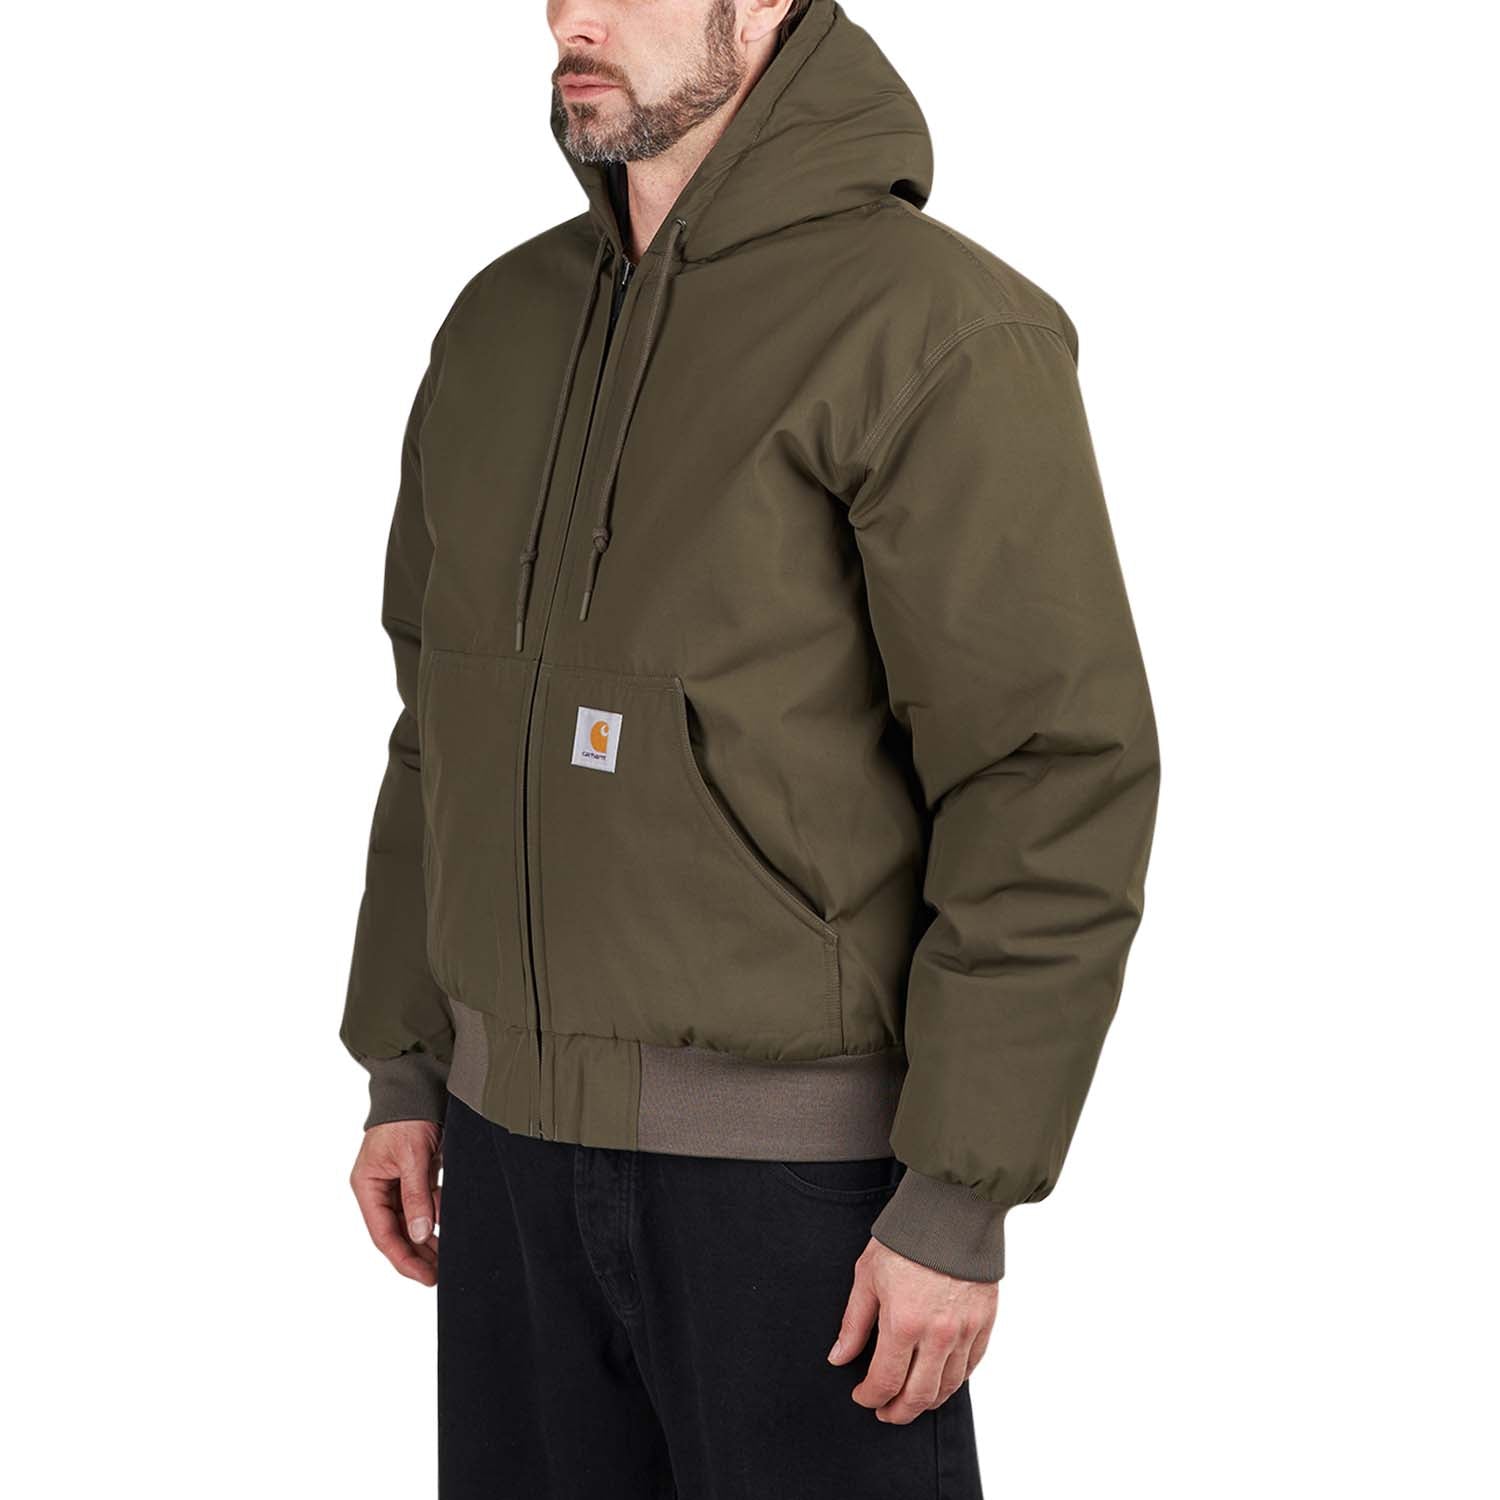 ACTIVE COLD JACKET